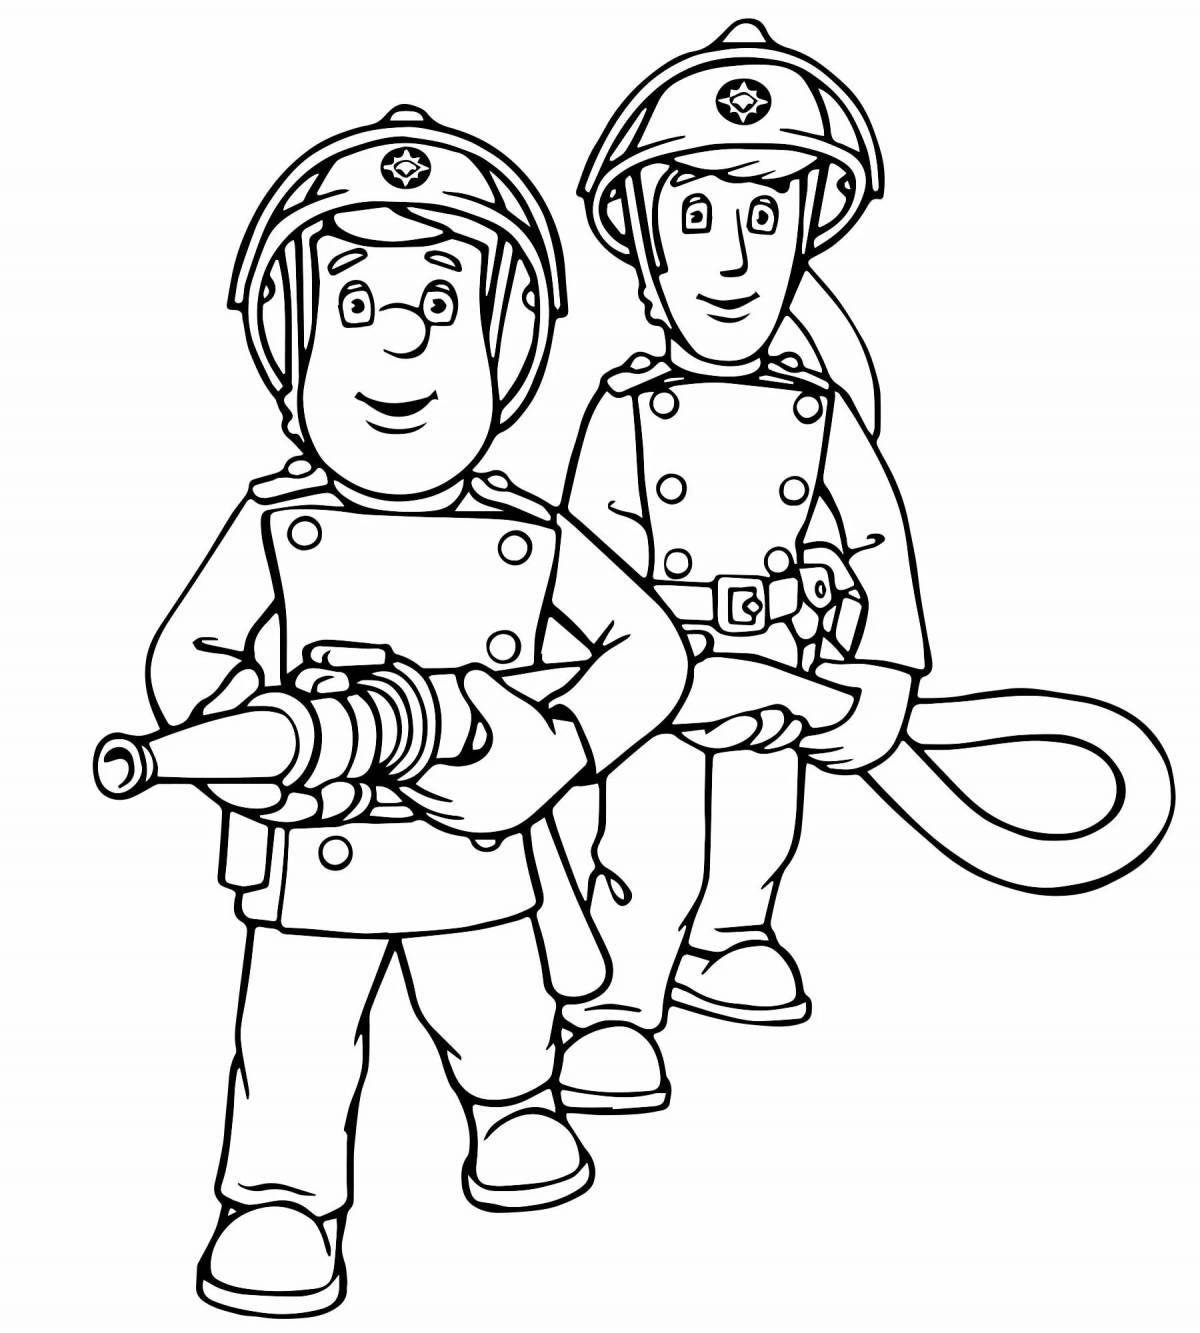 Animated drawing of a firefighter for children